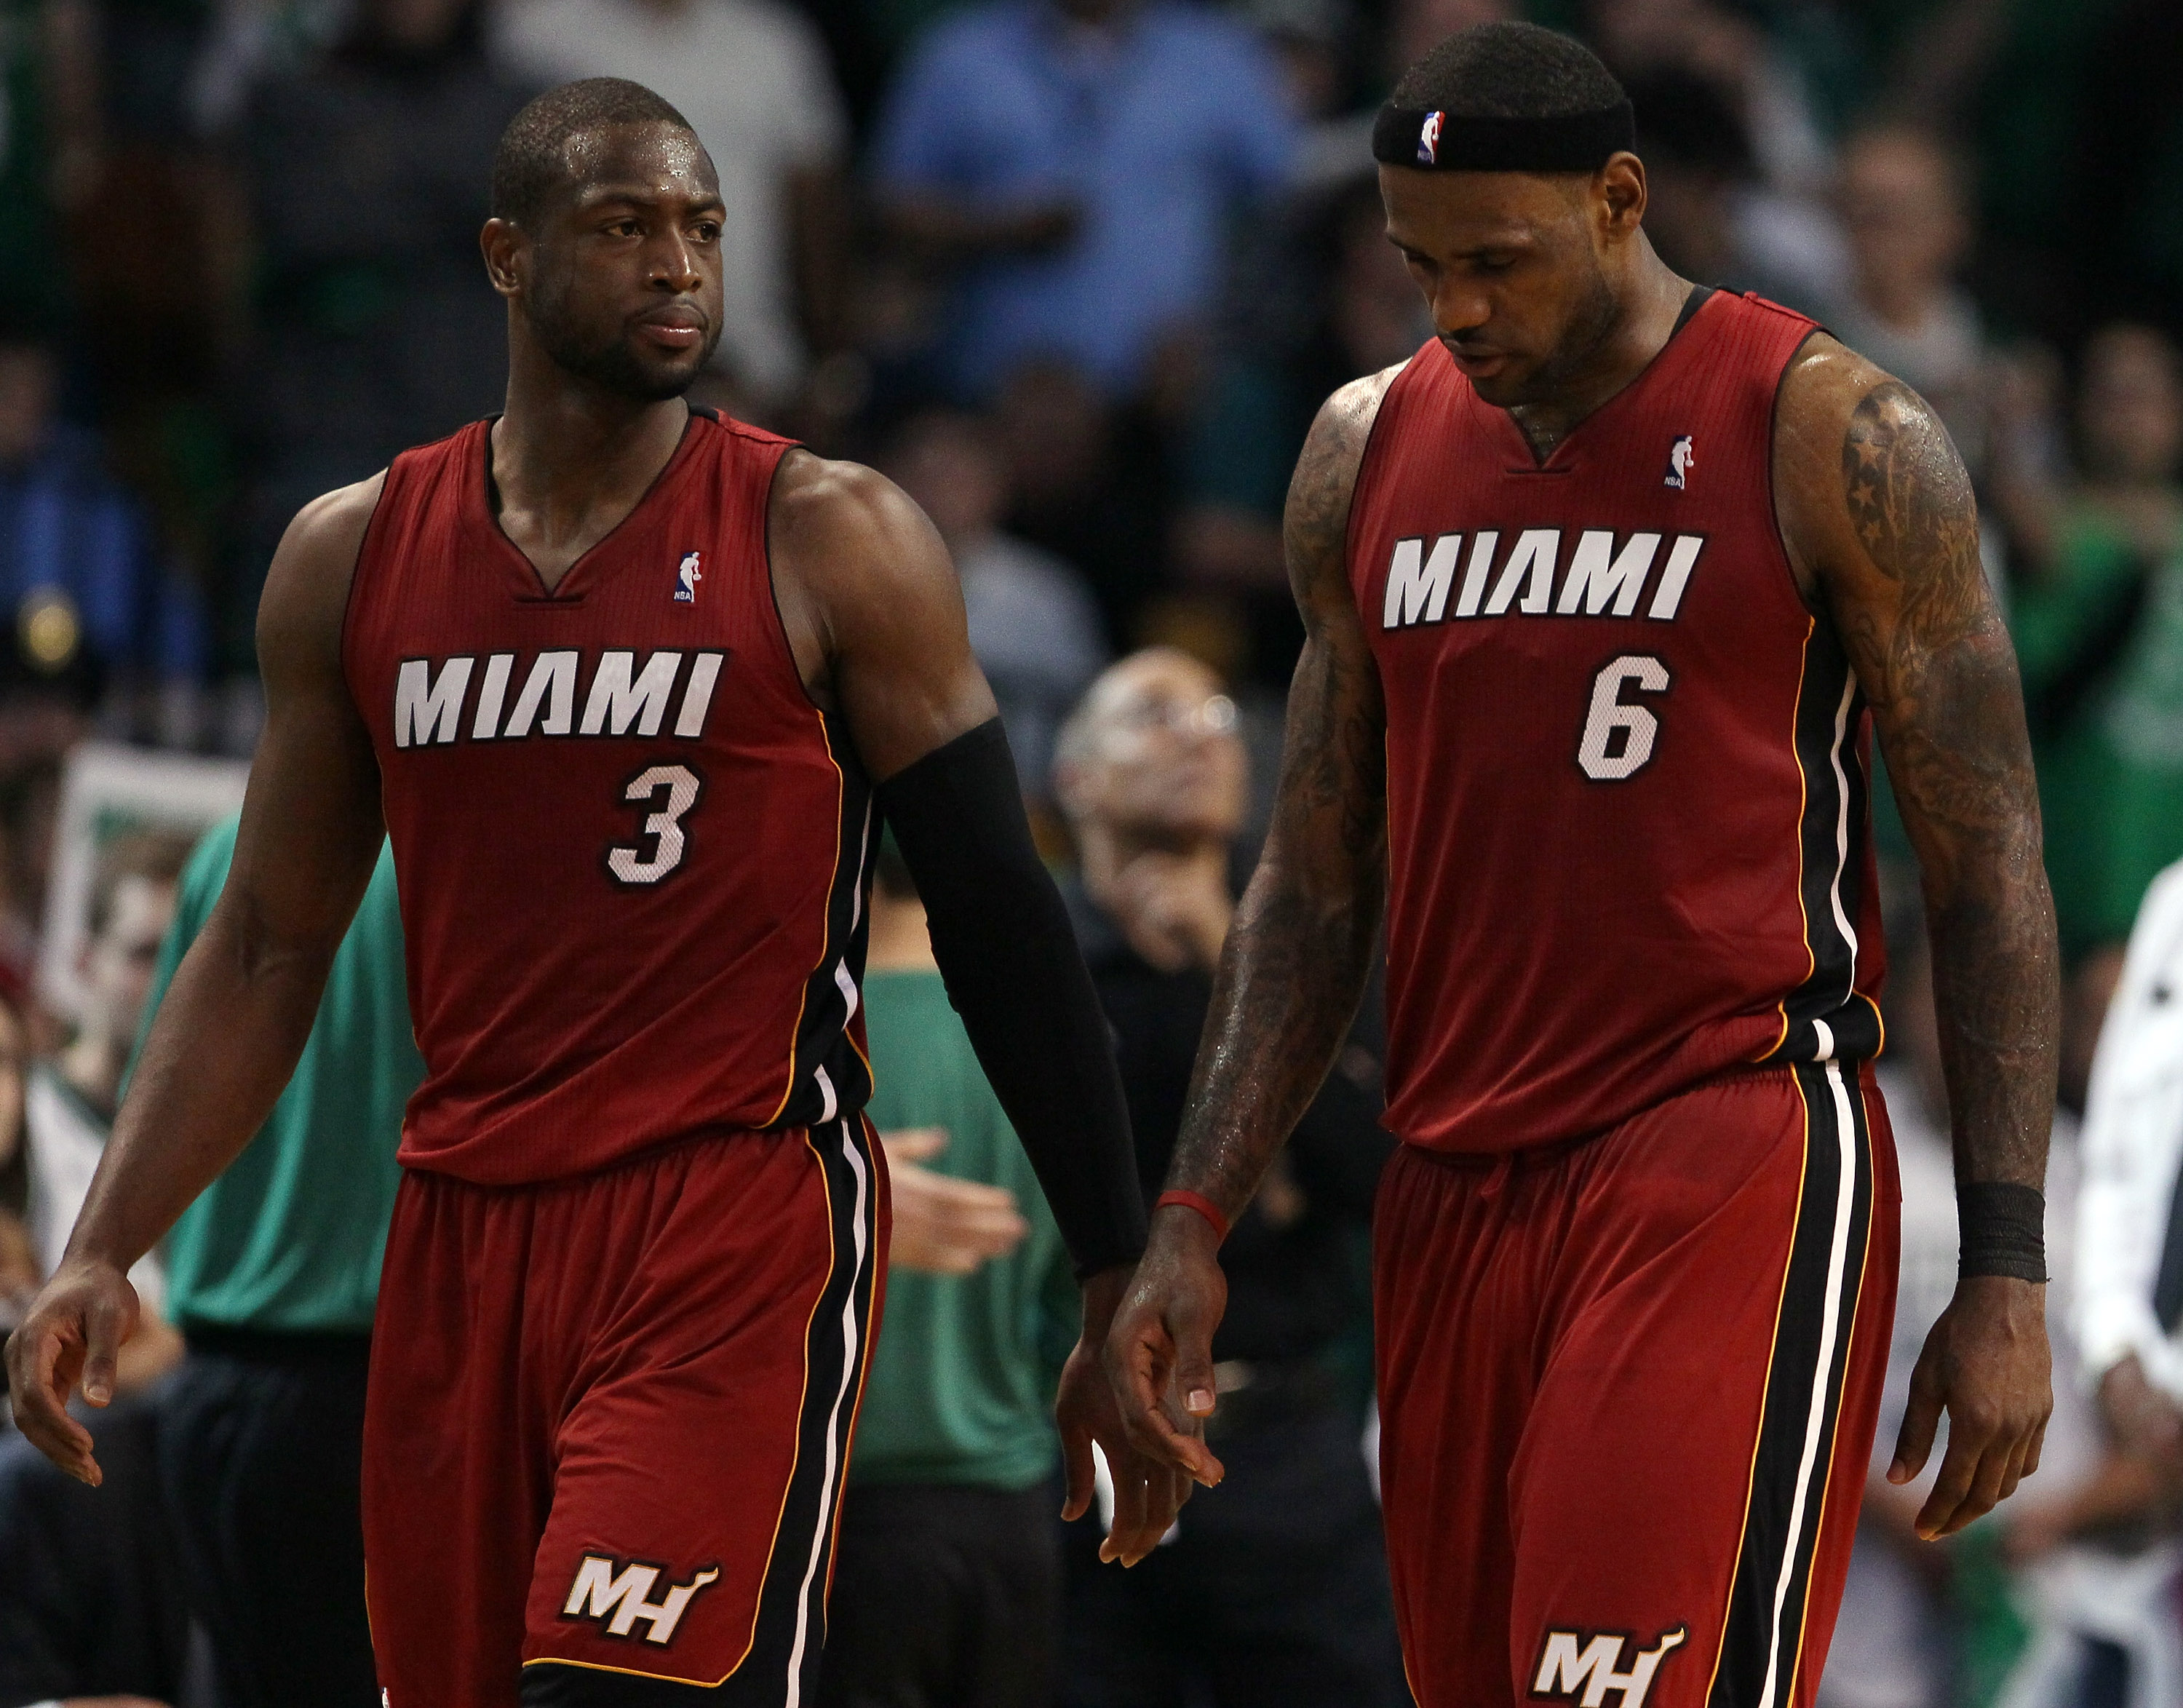 BOSTON, MA - MAY 07: Dwyane Wade #3 and LeBron James #6 of the Miami Heat walk on the court near the end of the game against the Boston Celtics in Game Three of the Eastern Conference Semifinals in the 2011 NBA Playoffs on May 7, 2011 at the TD Garden in